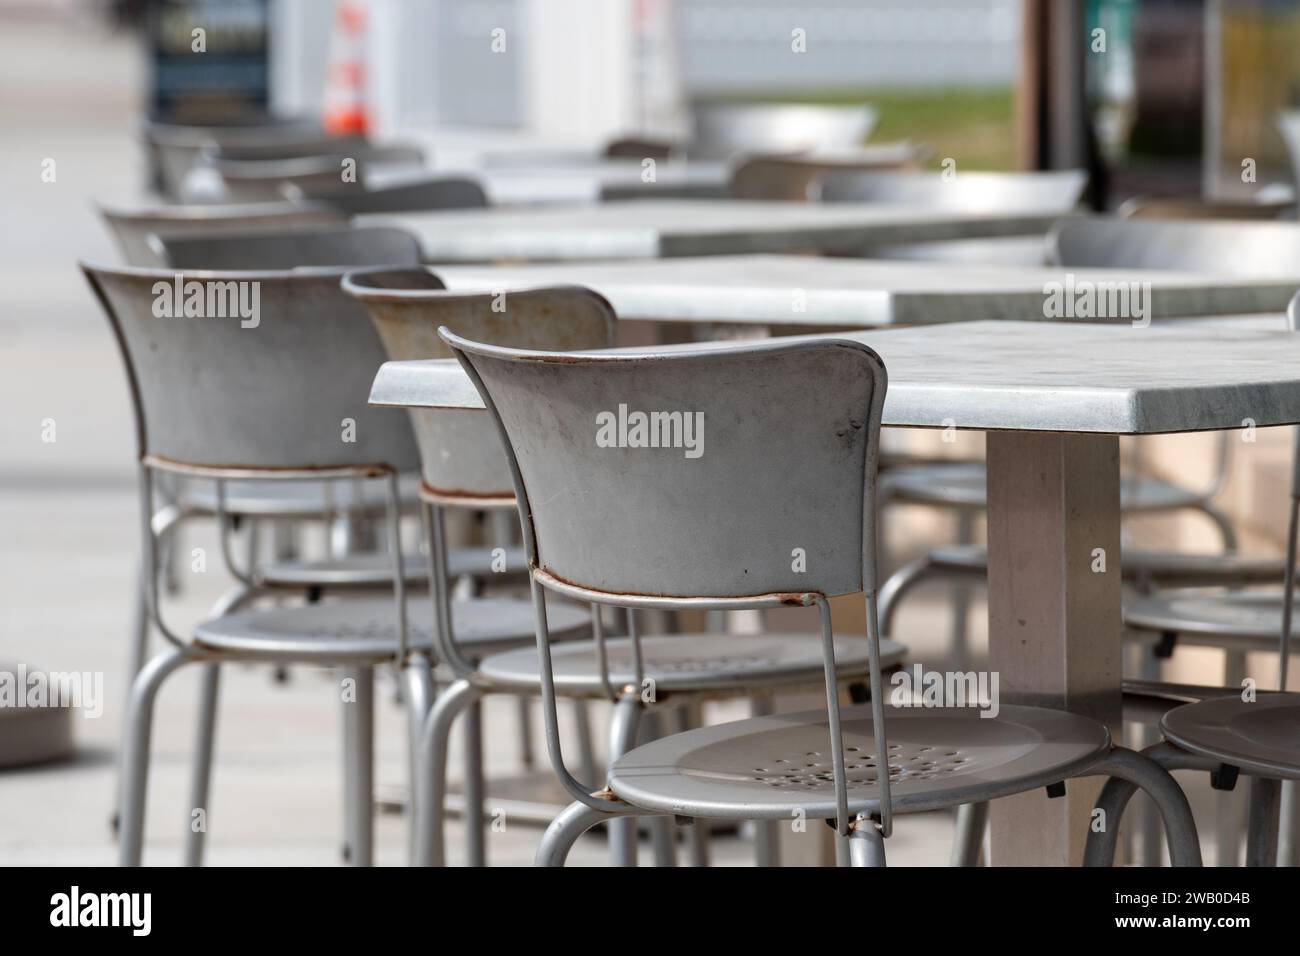 A row of multiple empty grey metal square tables and chairs outside on the sidewalk of a cafe or bakery. The chairs have round backs and are empty. Th Stock Photo